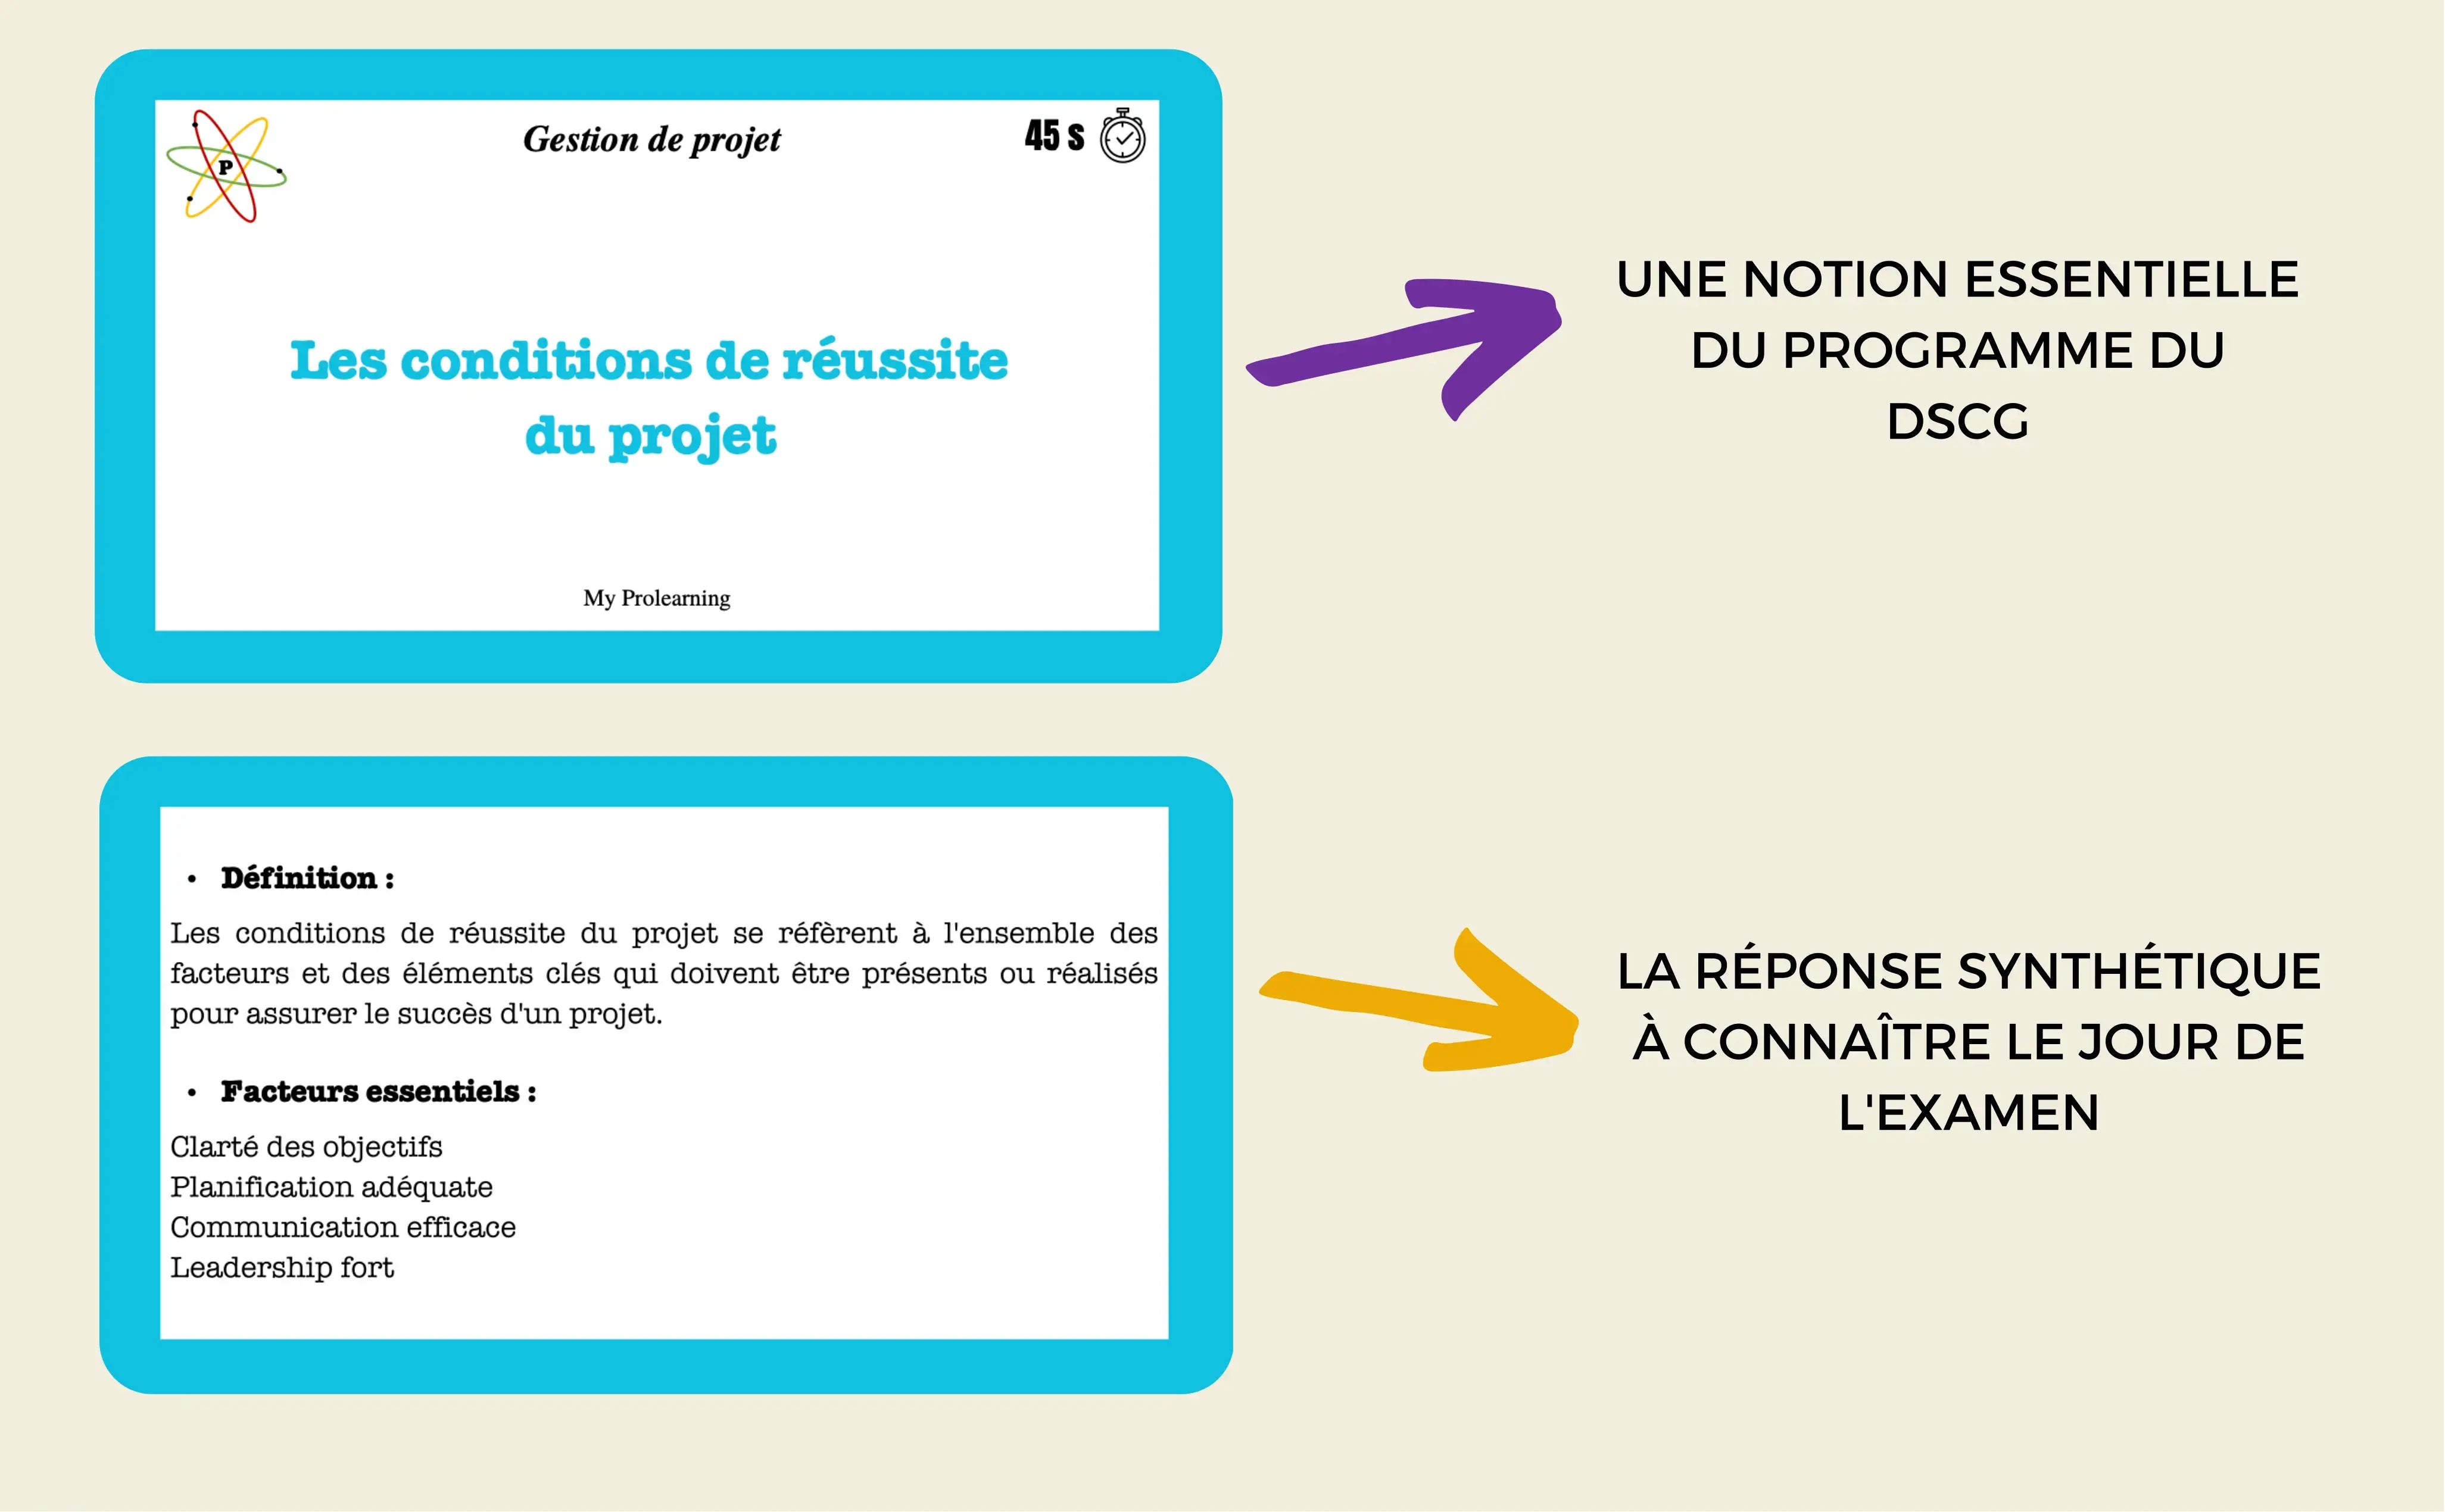 FICHES GESTION DE PROJET - My Prolearning 